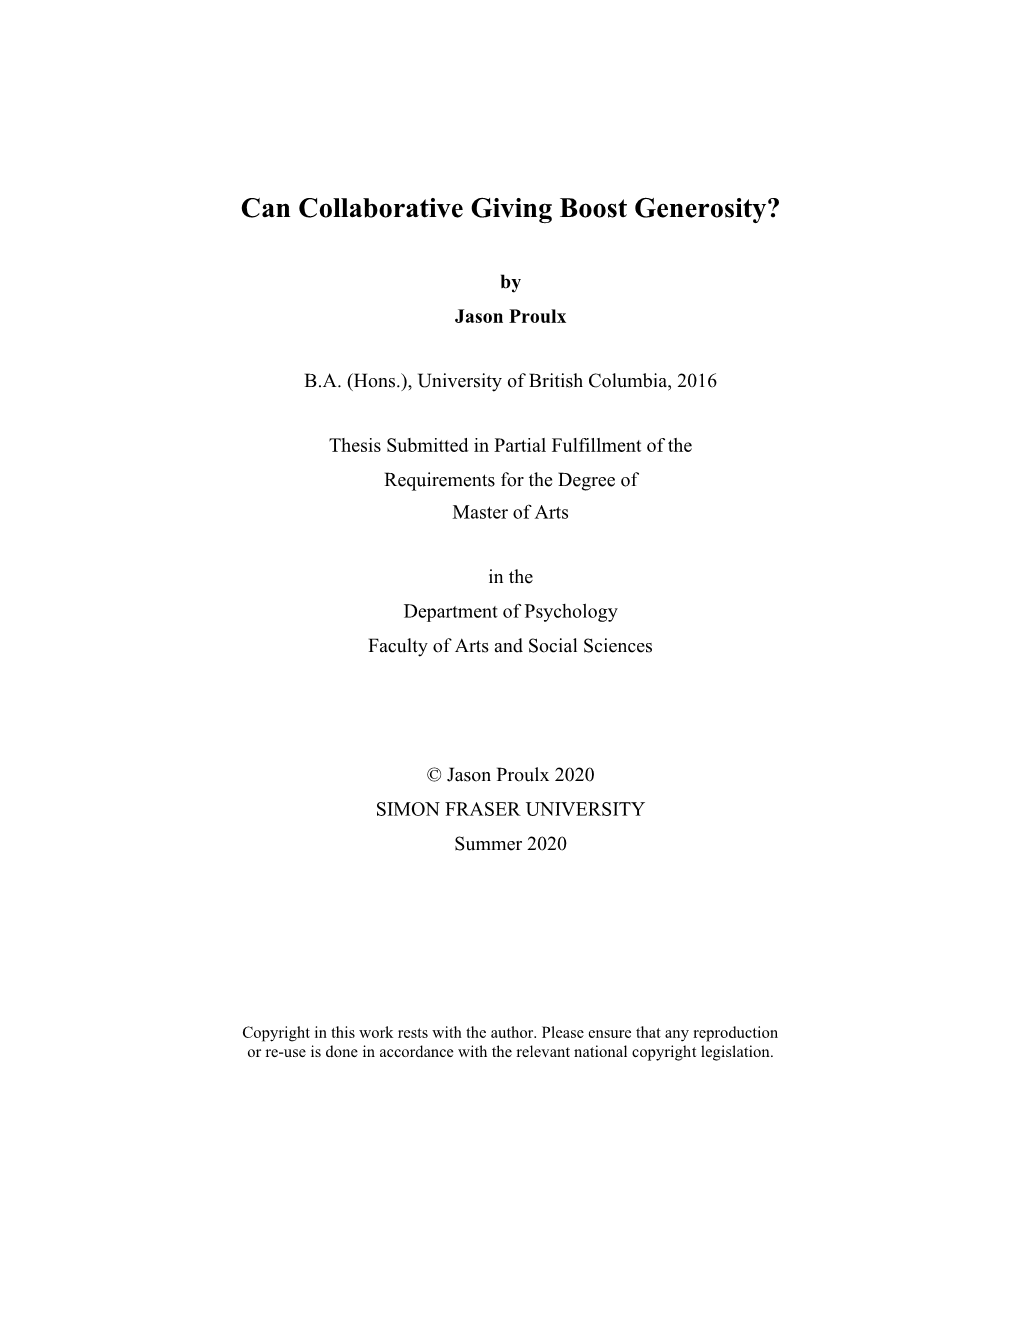 Can Collaborative Giving Boost Generosity?